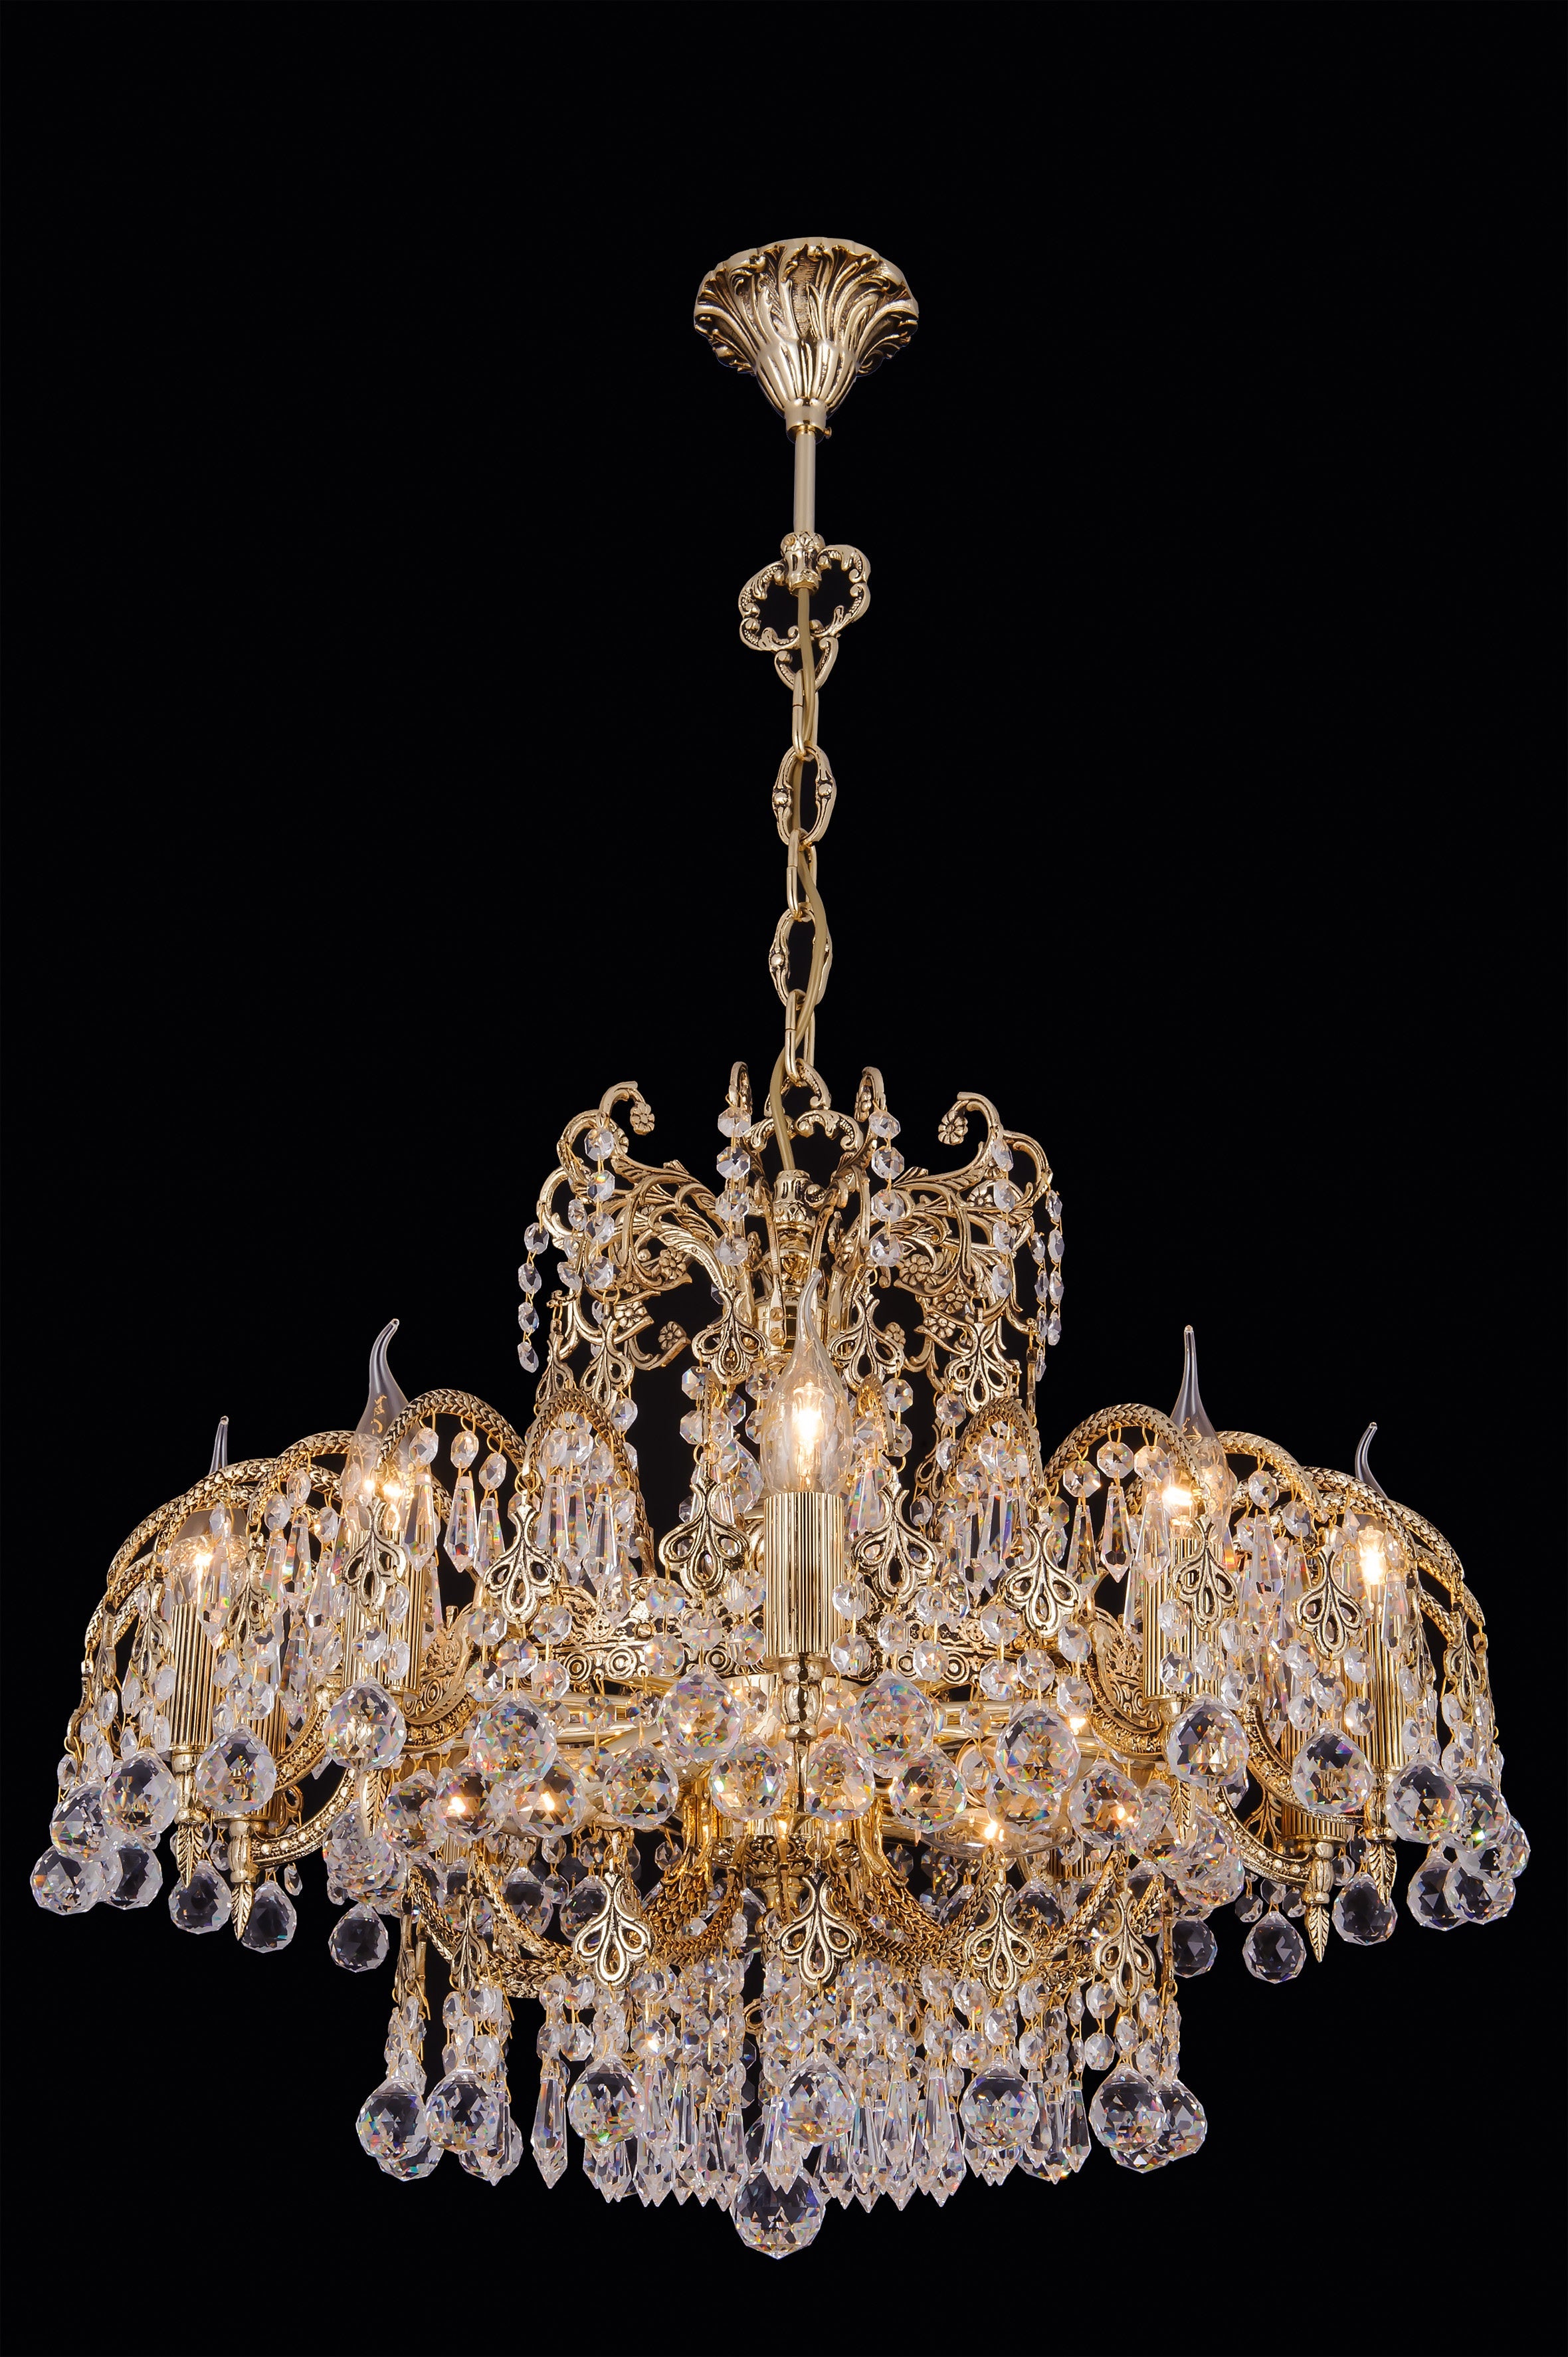 Nantes Majestic 12-Light Asfour Crystal Grand Chandelier in Gold Finish